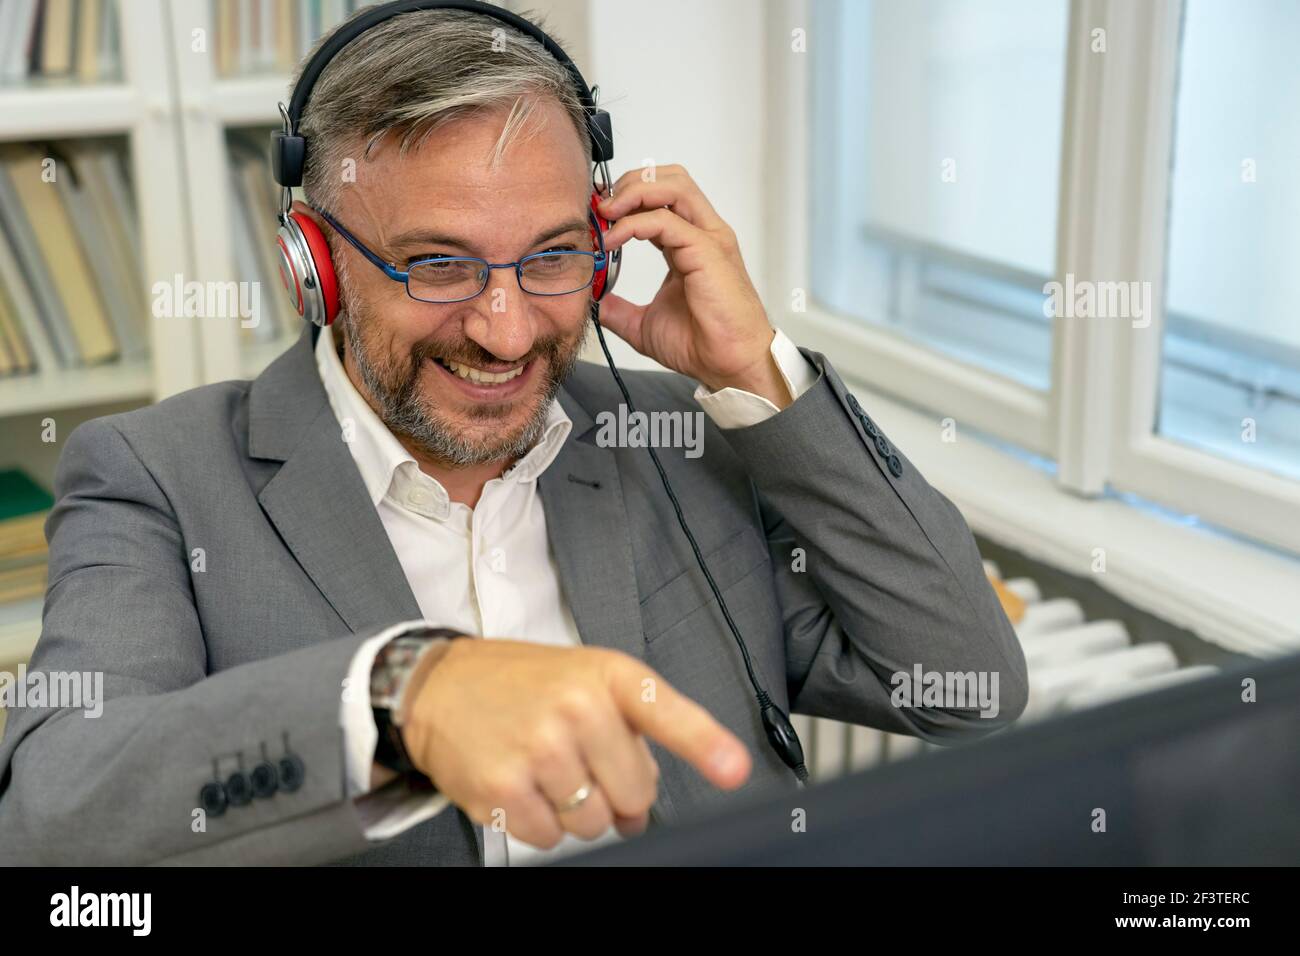 Smiling Mature Businessman With Headphones Sitting at Office Desk Pointing at Computer Monitor. Excited Businessman Gesturing with Hand in His Office. Stock Photo